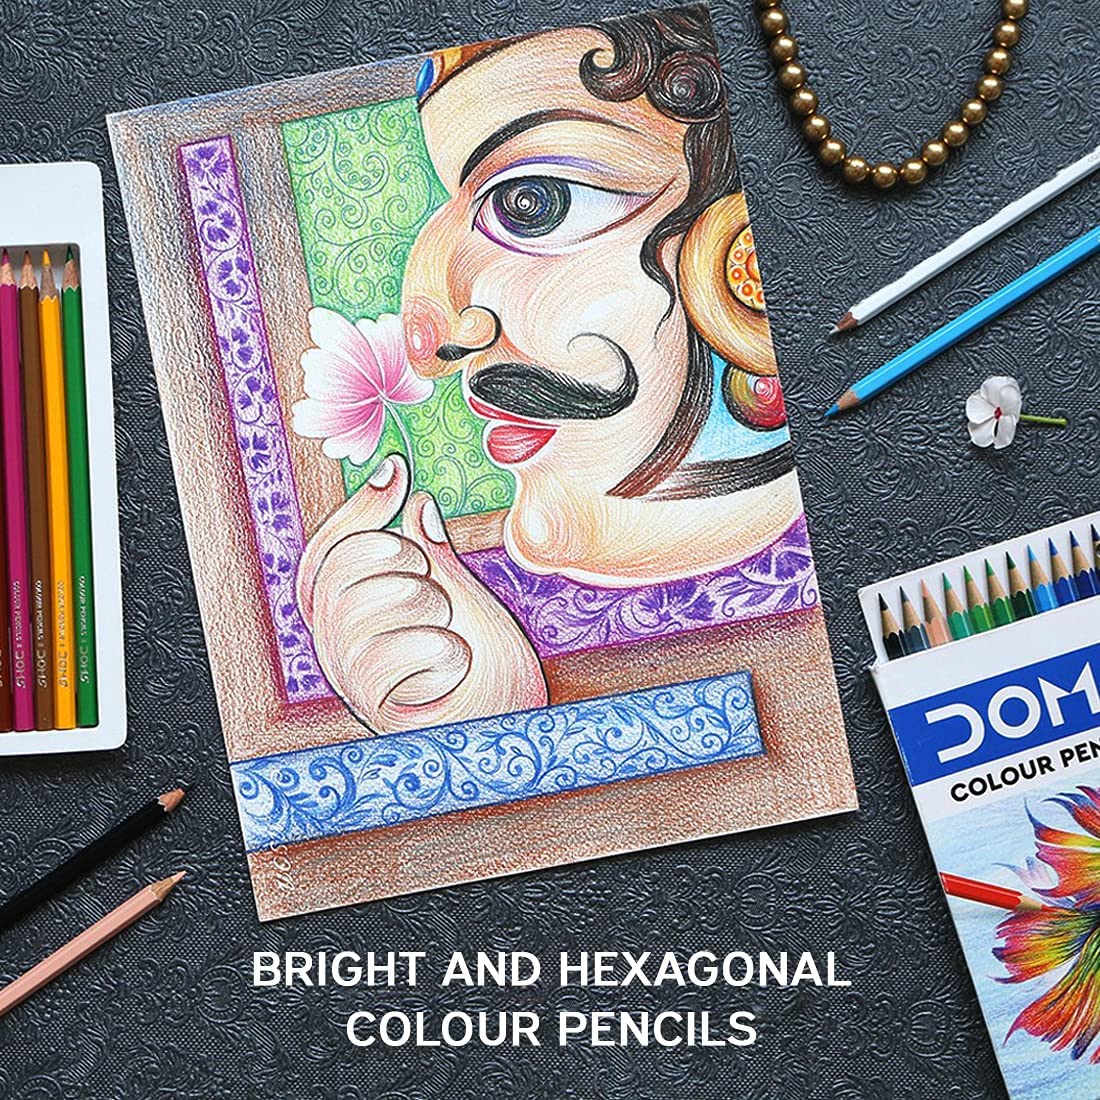 Buy DOMS Colour Pencils 24 Shades online in India | Hello August